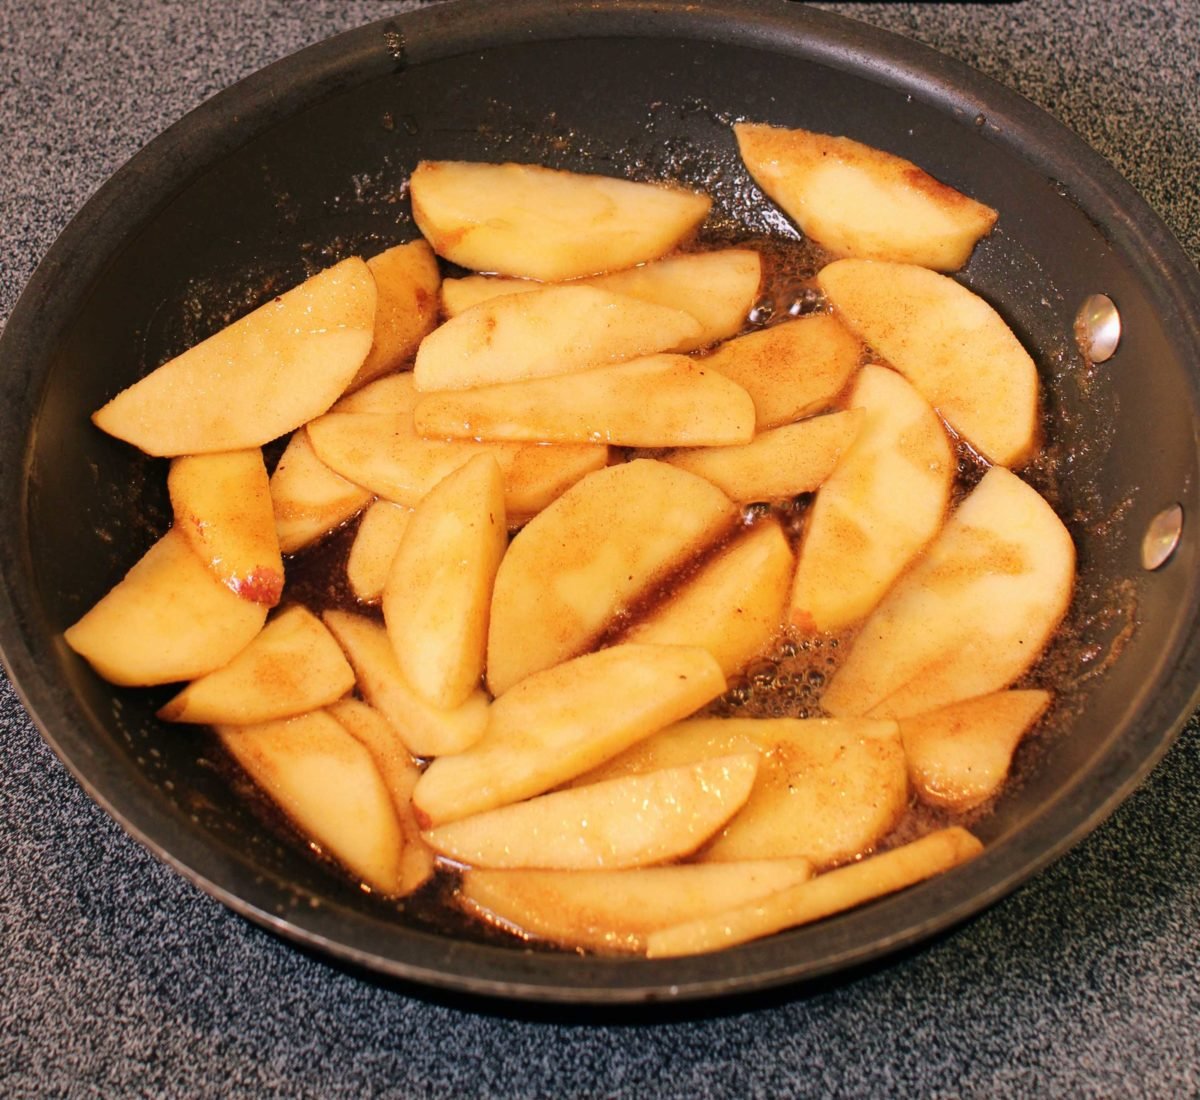 apple slices tossed with melted butter and brown sugar in a frying pan.